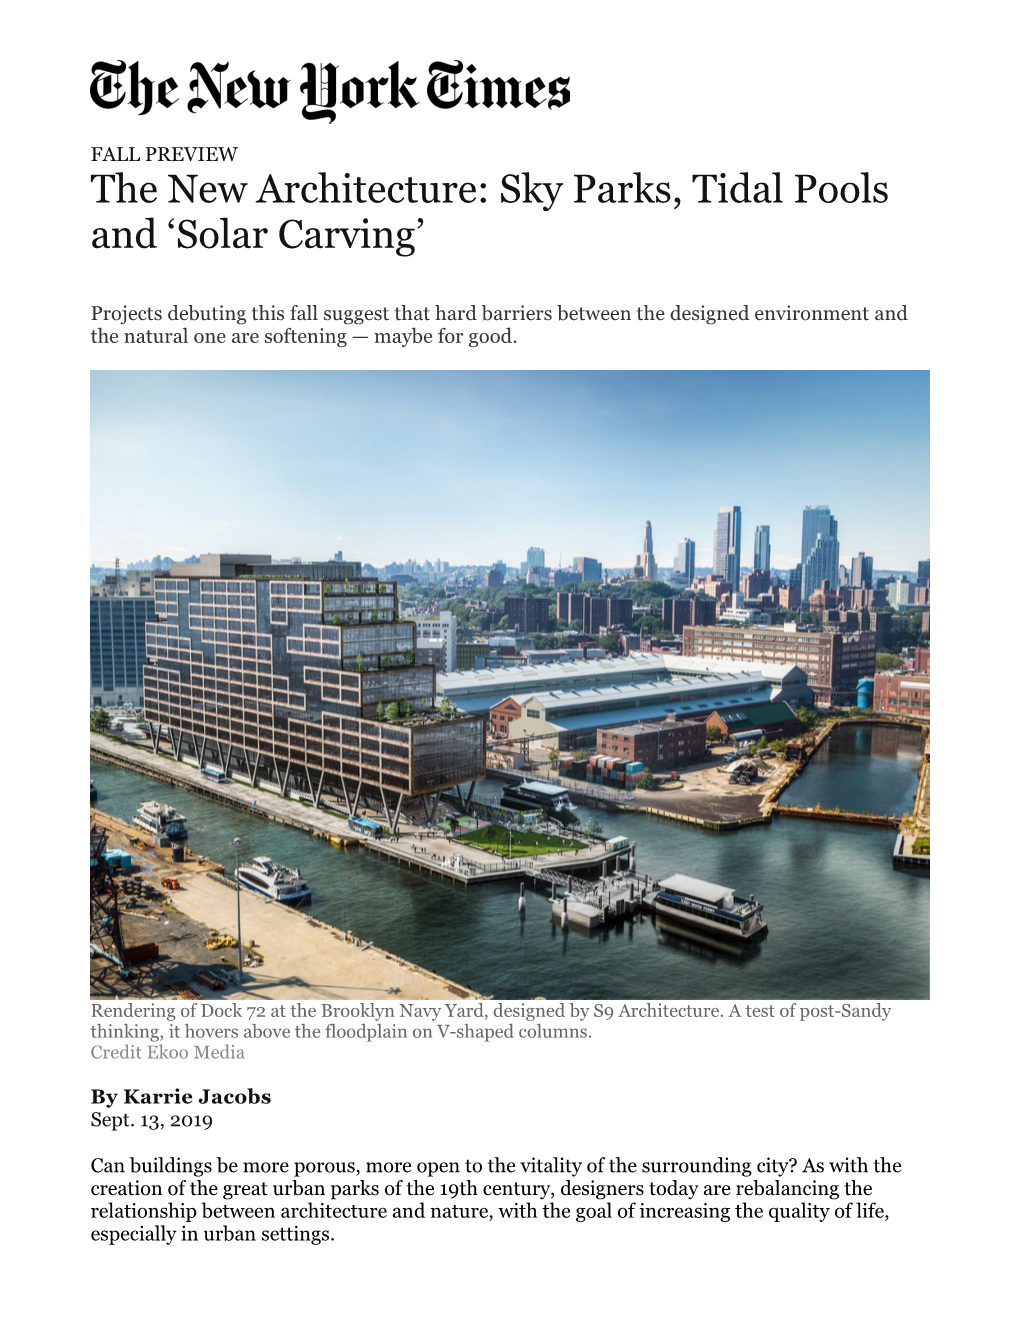 The New Architecture: Sky Parks, Tidal Pools and 'Solar Carving'